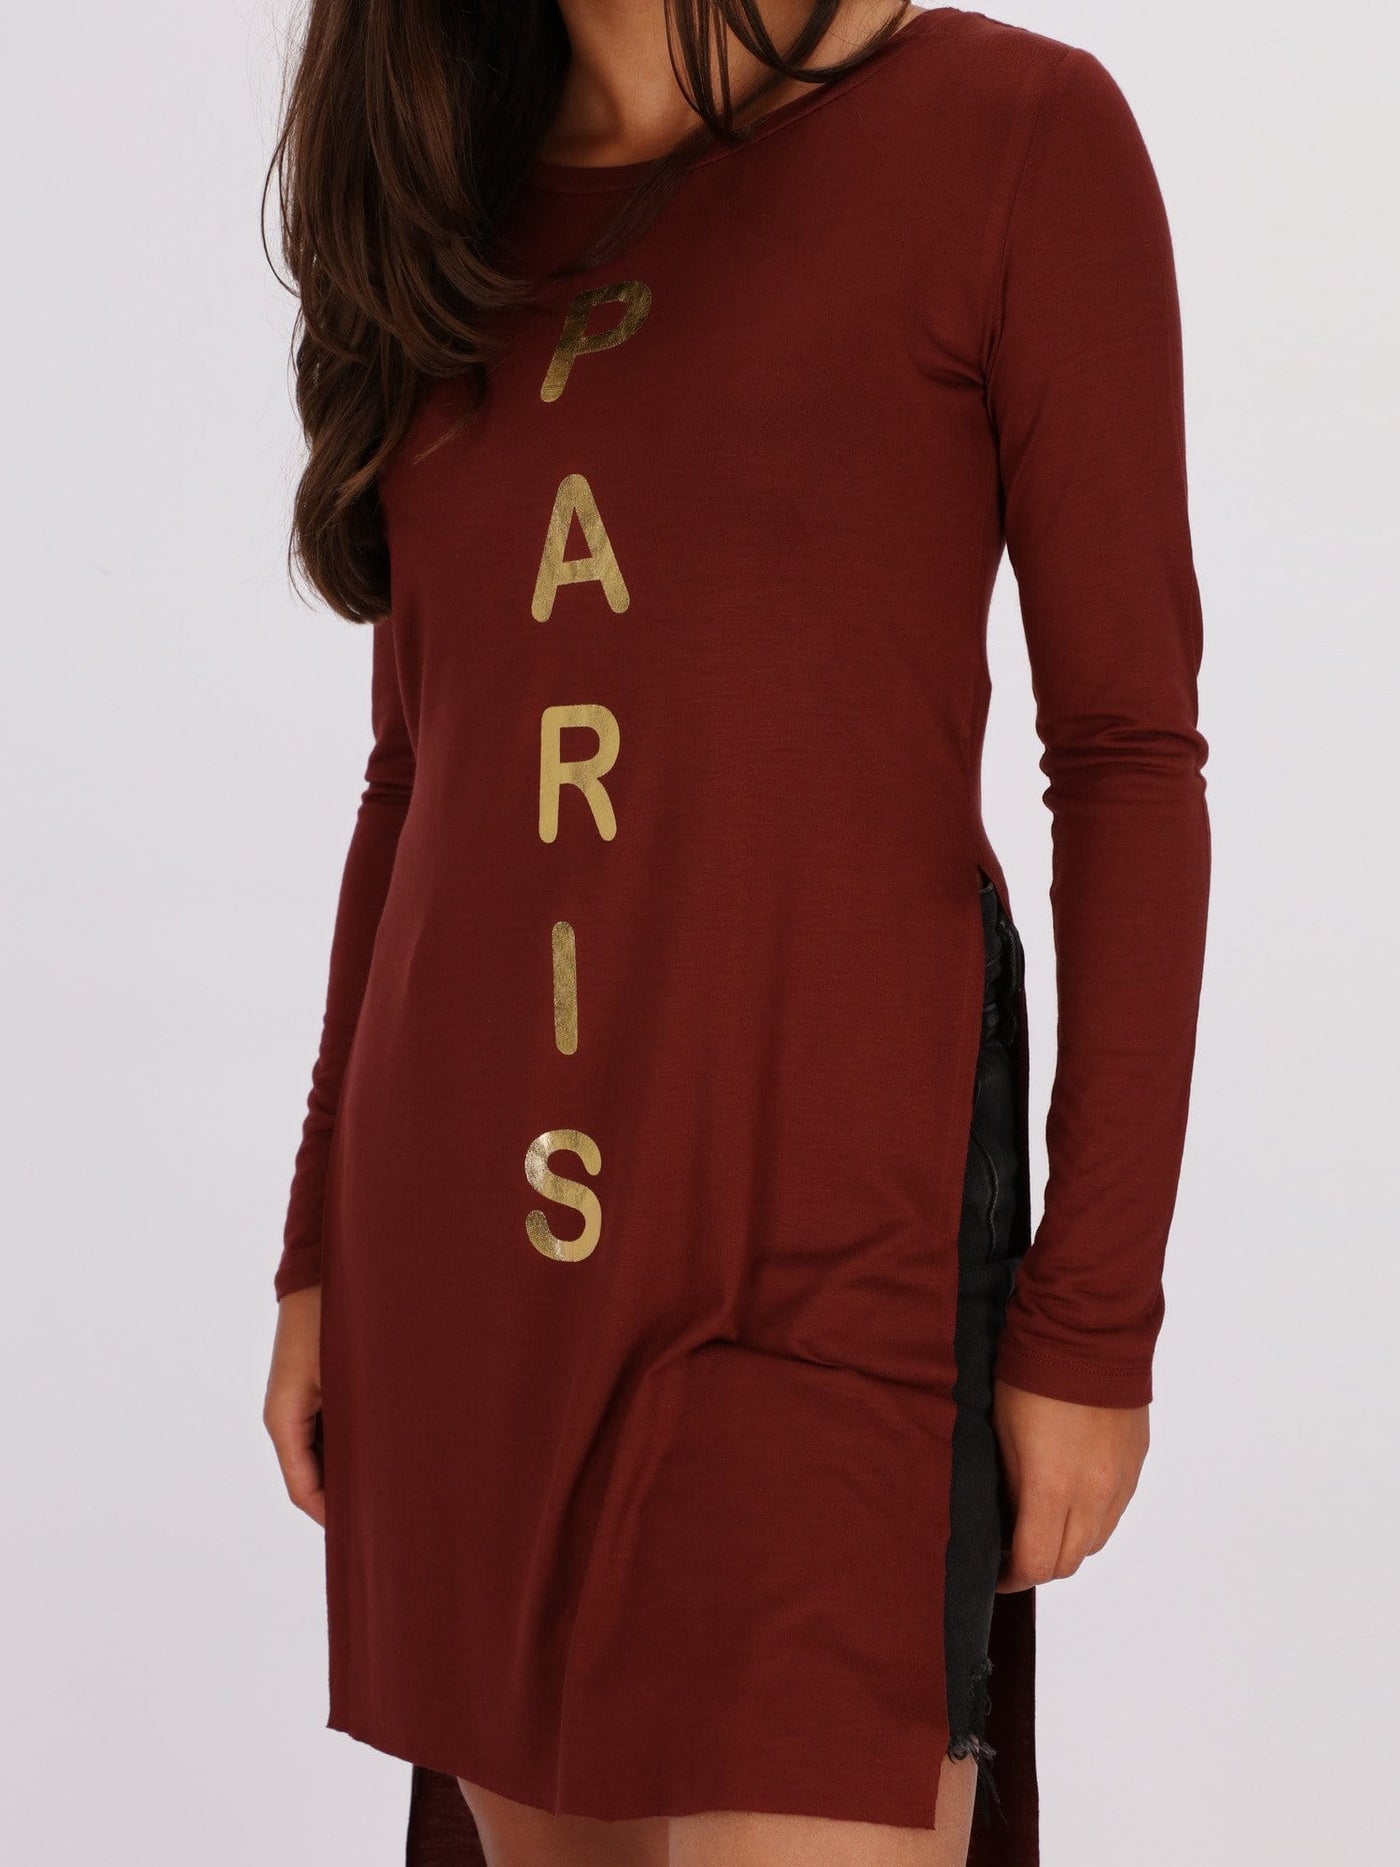 OR Tops & Blouses Andorra - V68 / S Long Top with Side Slits and Front Print